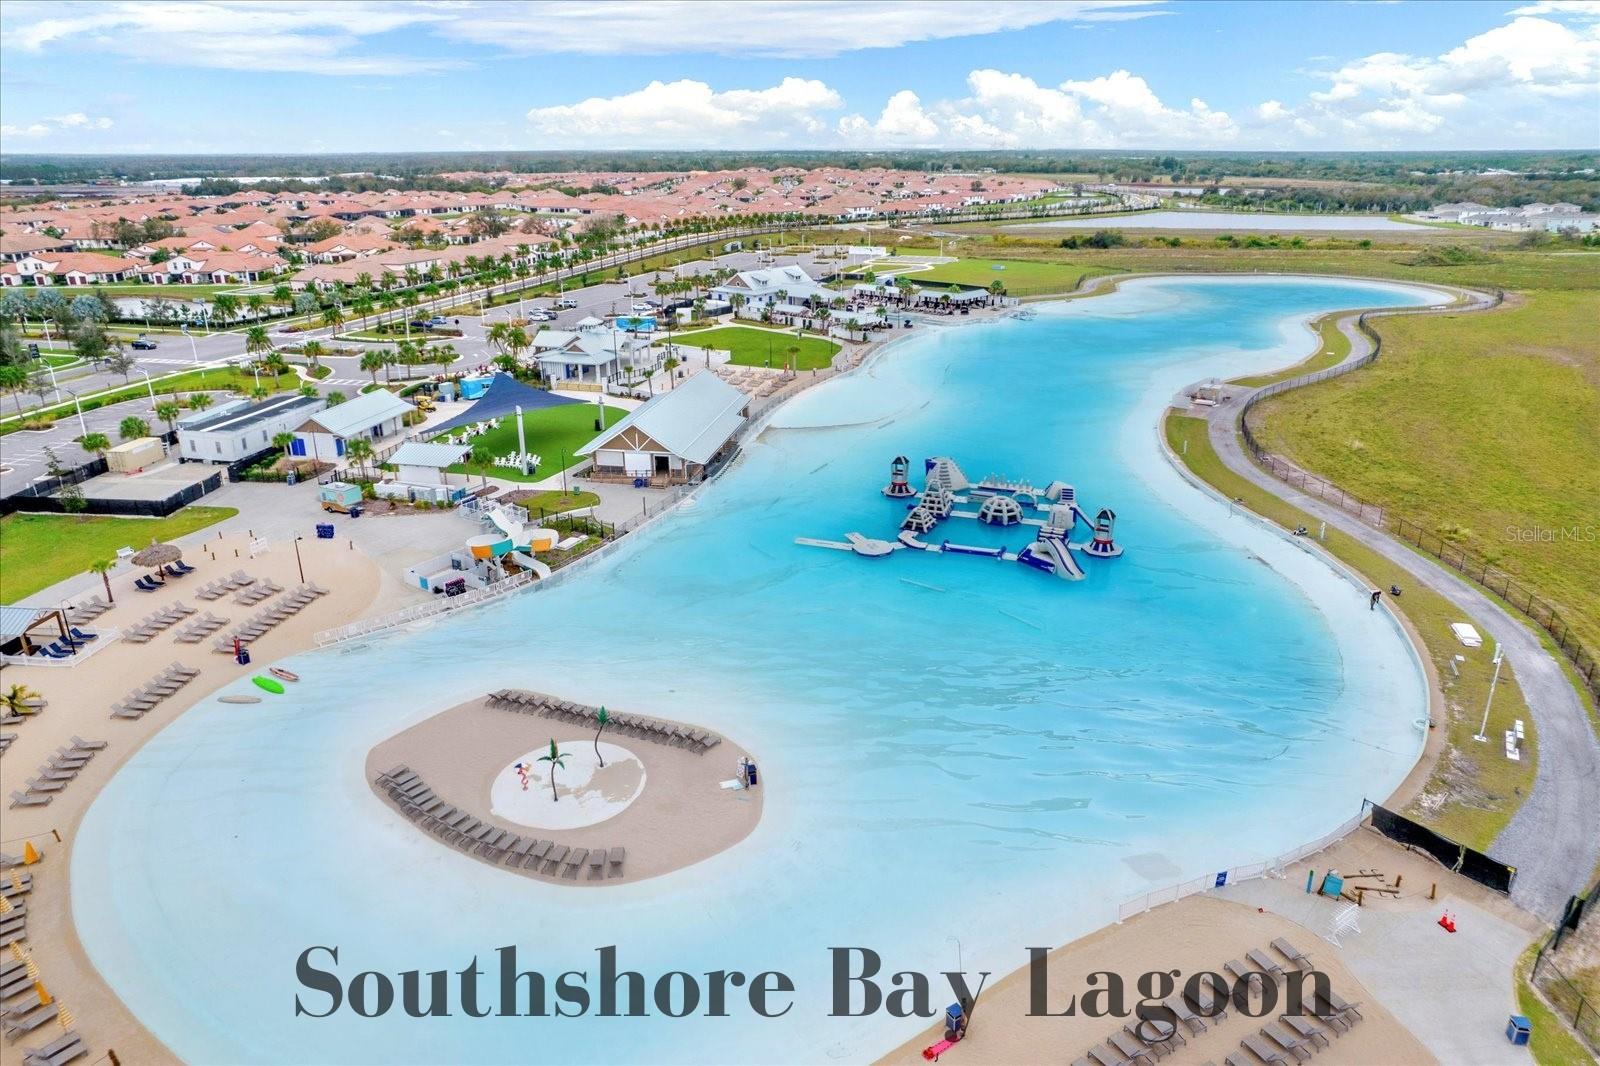 Southshore Bay Lagoon -- only a quick 5 minute drive!!